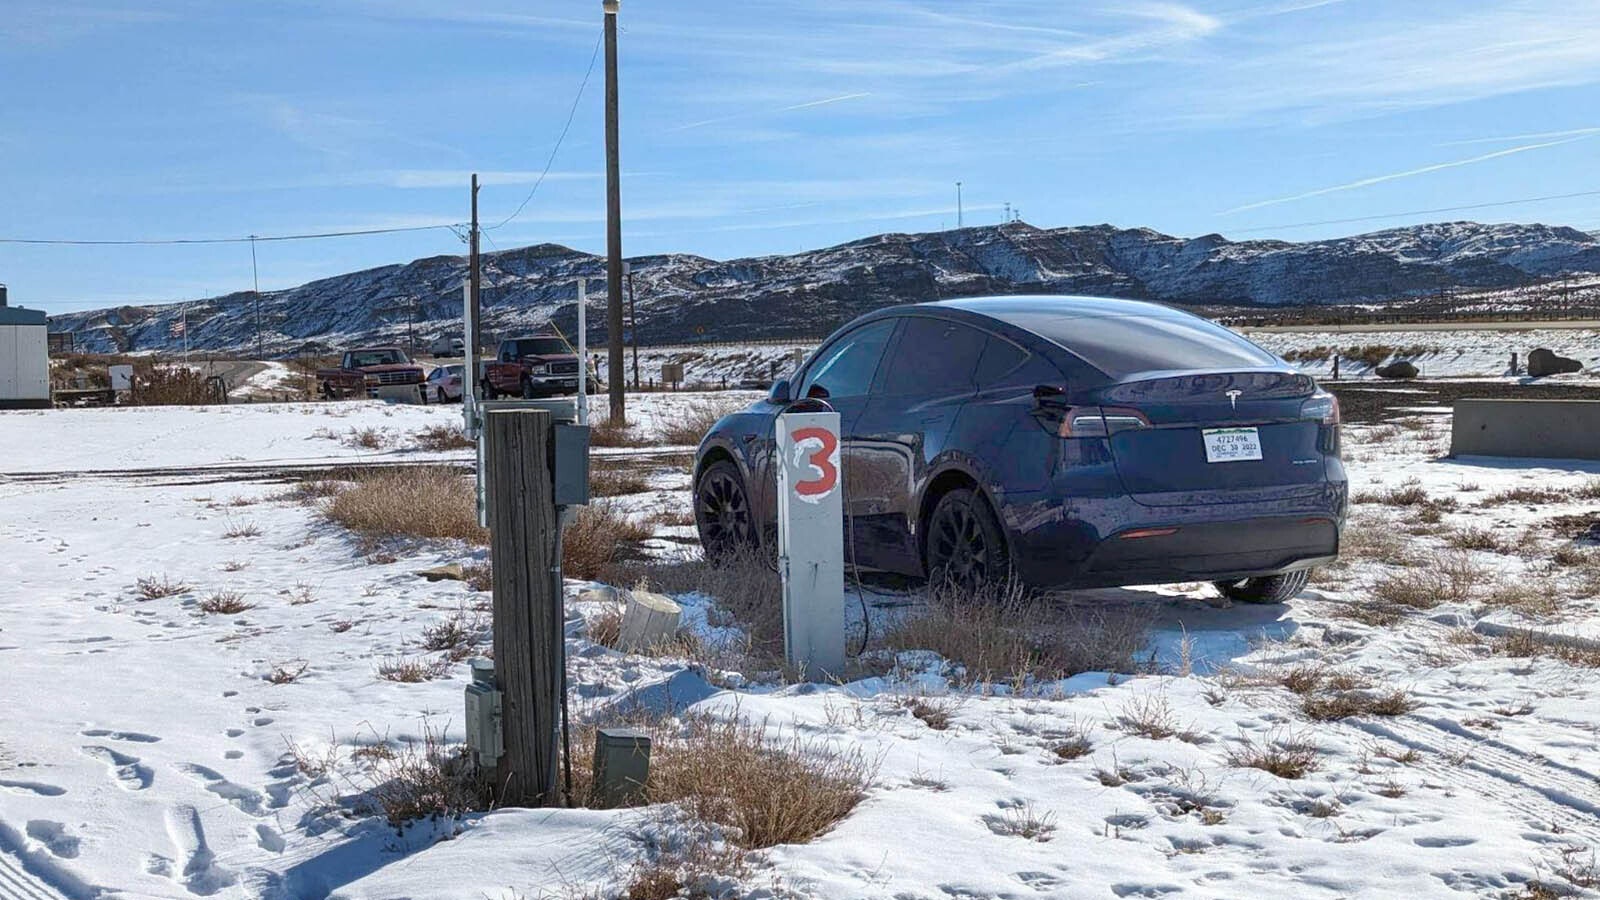 Roger Varley, owner of the Points of Rock Travel Center off Interstate 80 near the Jim Bridger power plant, uses a makeshift charging station at his RV camp to juice up Teslas and other electric vehicles.